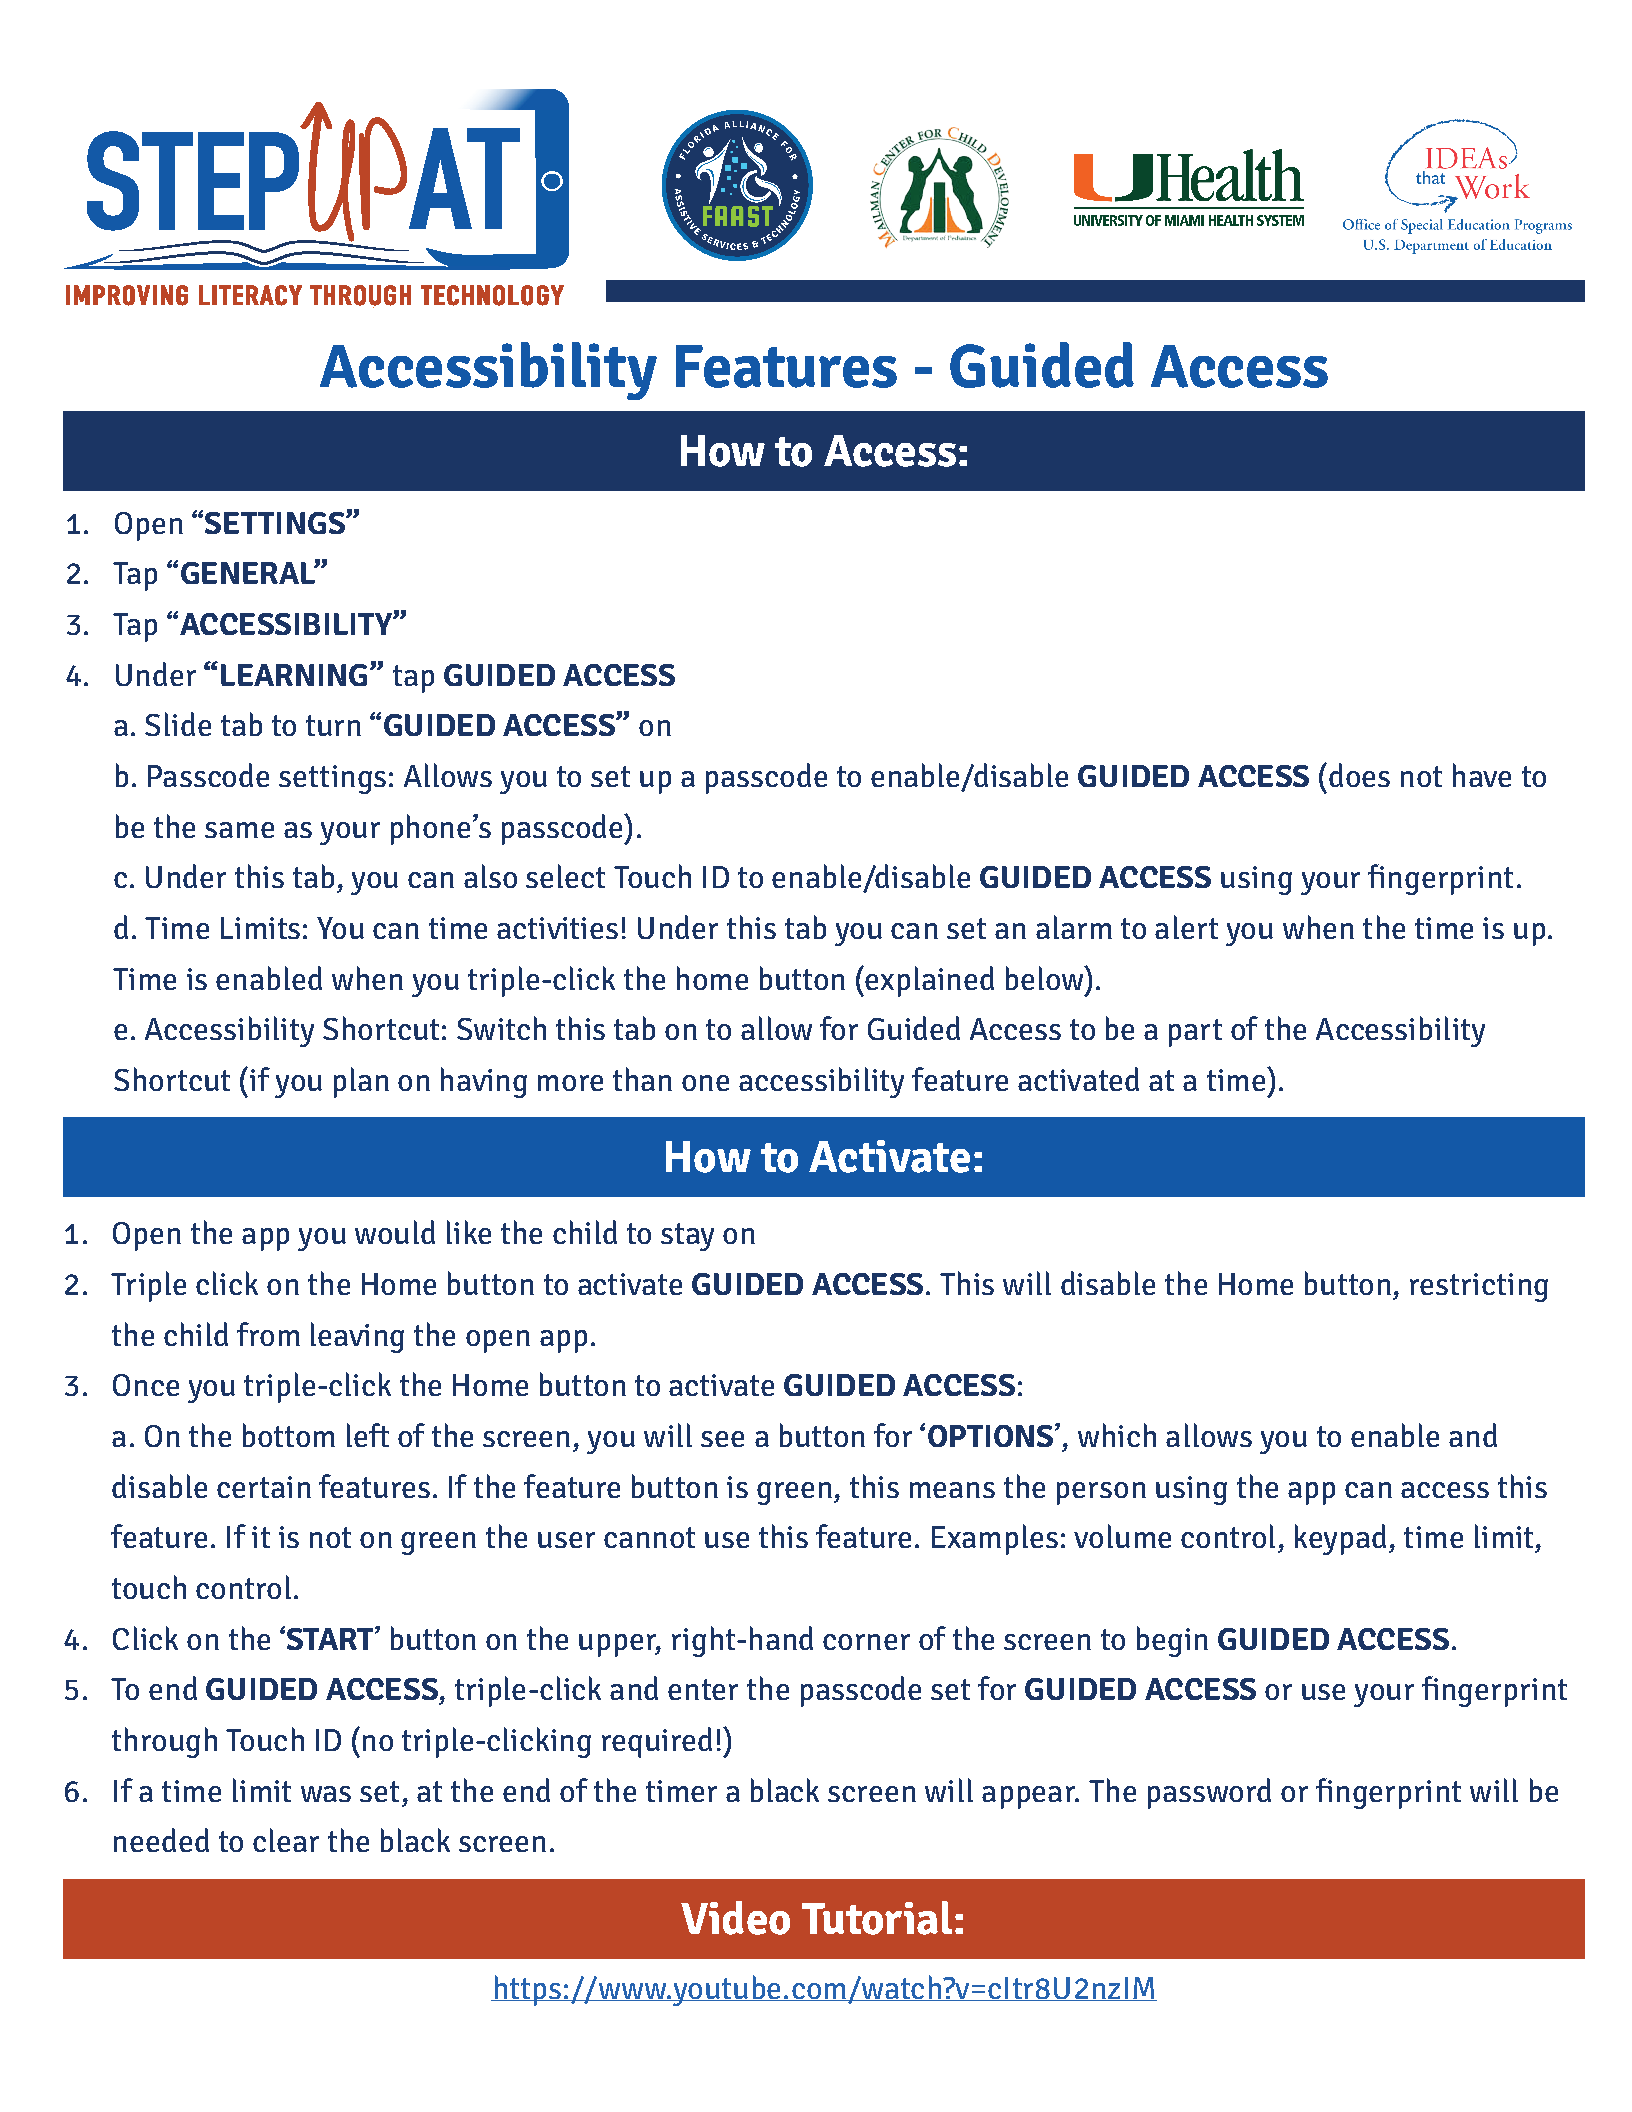 iOS Accessibility Features, how to set up Guided Access in English